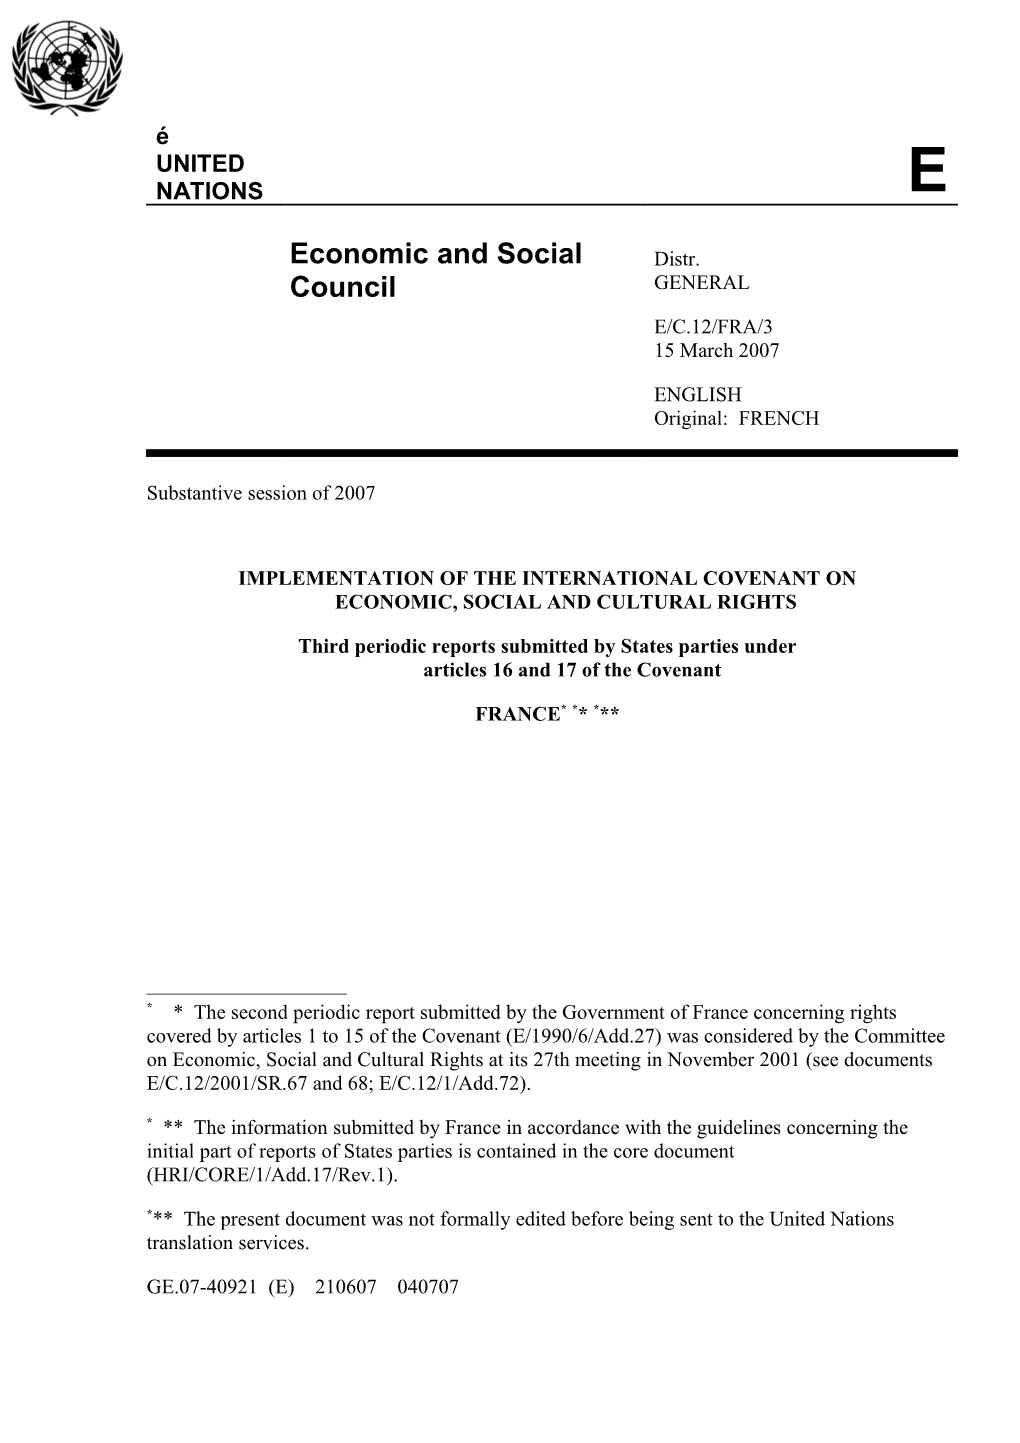 Implementation of the International Covenant Oneconomic, Social and Cultural Rights